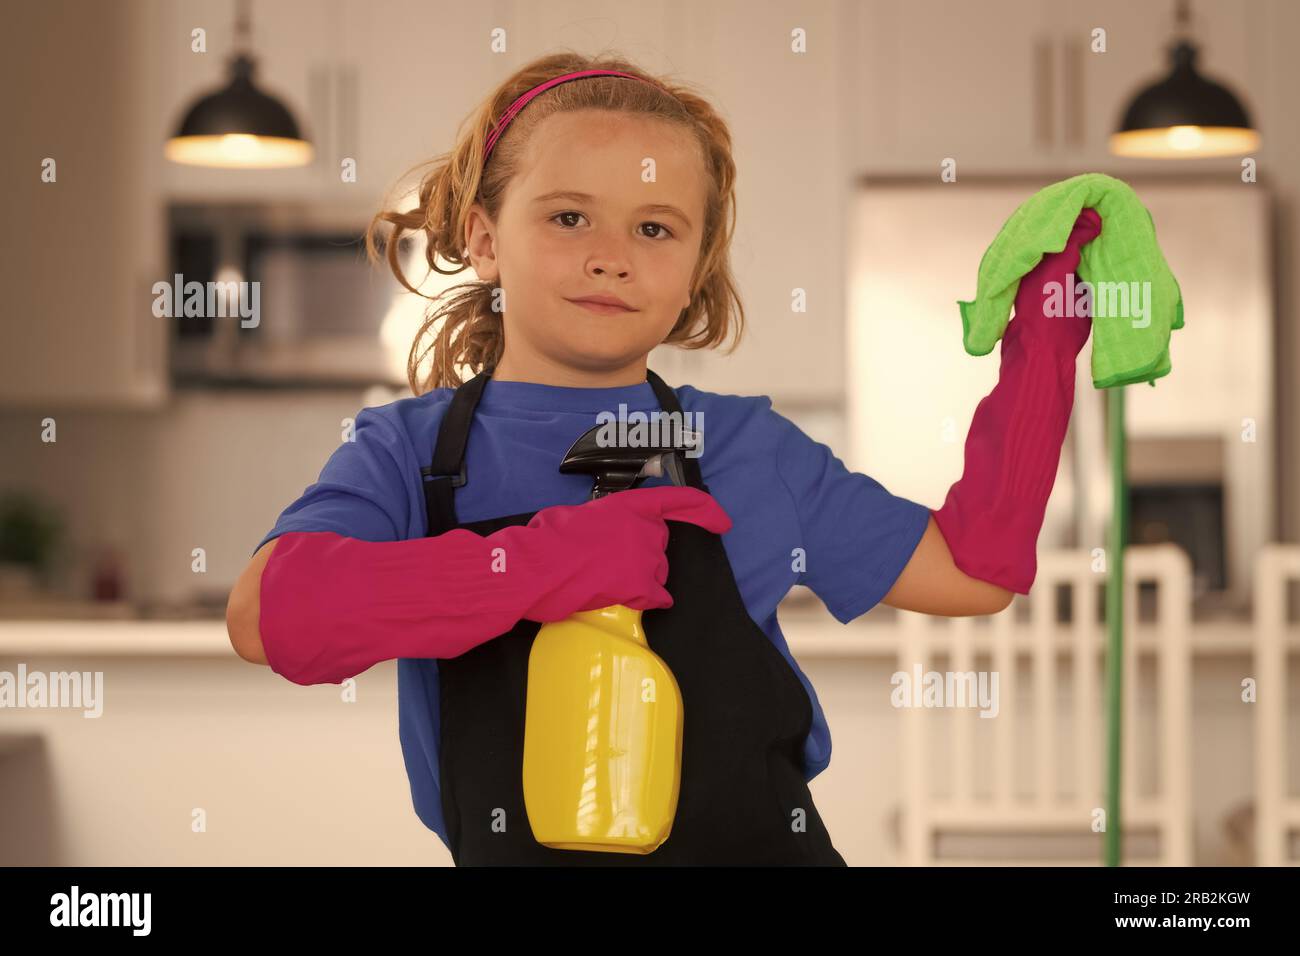 Cleaning house. Child use duster and gloves for cleaning. Funny child mopping house Stock Photo